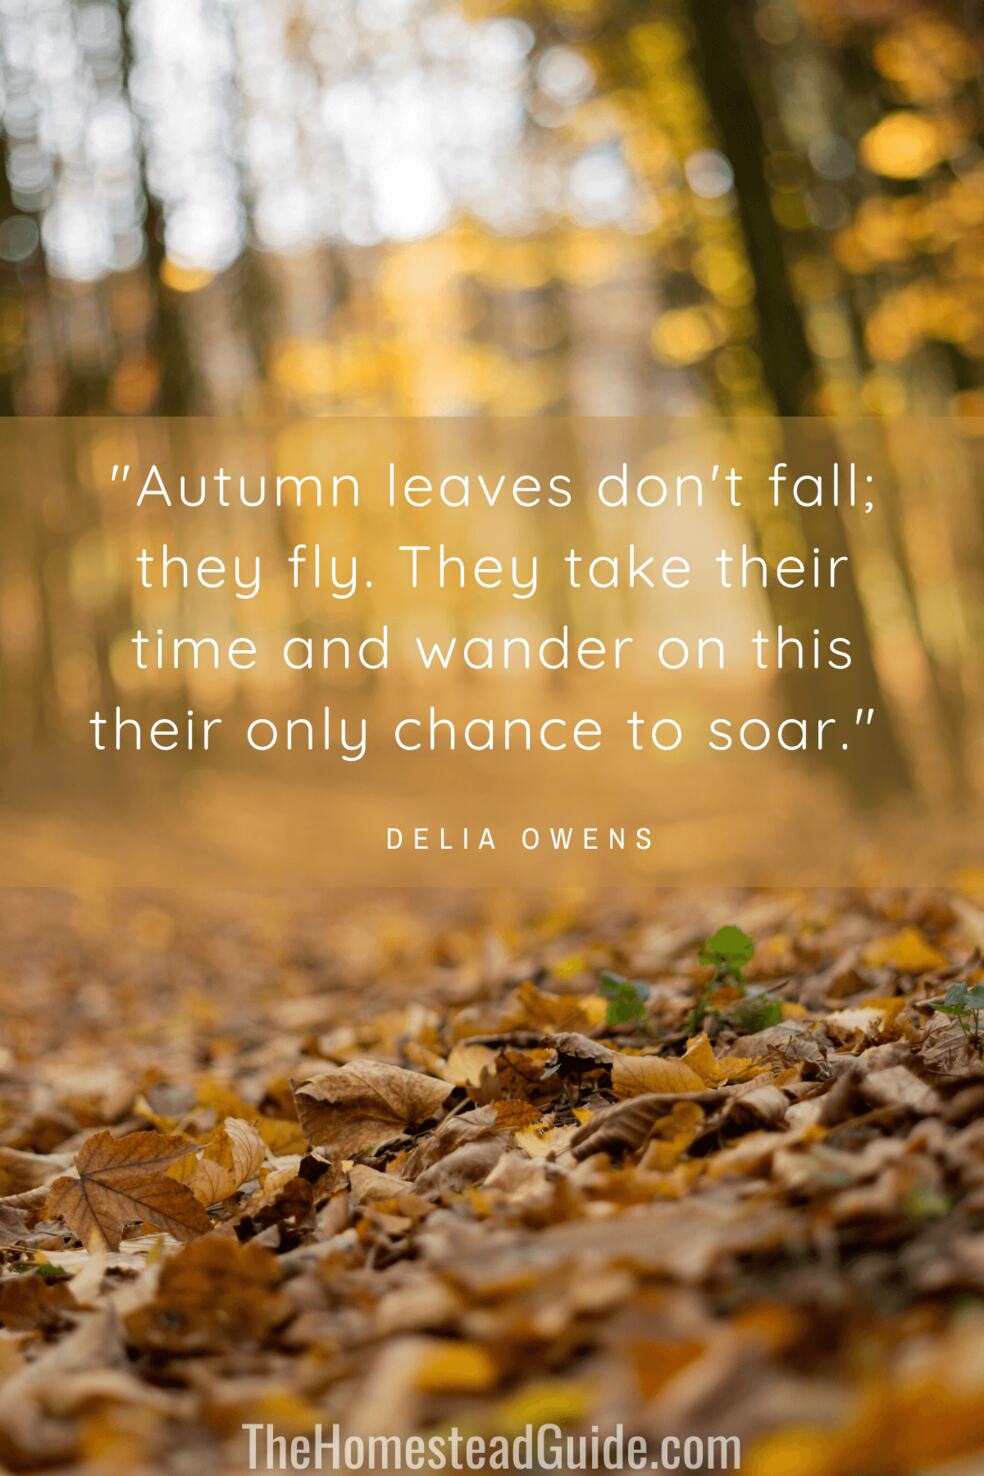 Autumn leaves dont fall - they fly. They take their time and wander on this their only chance to soar.